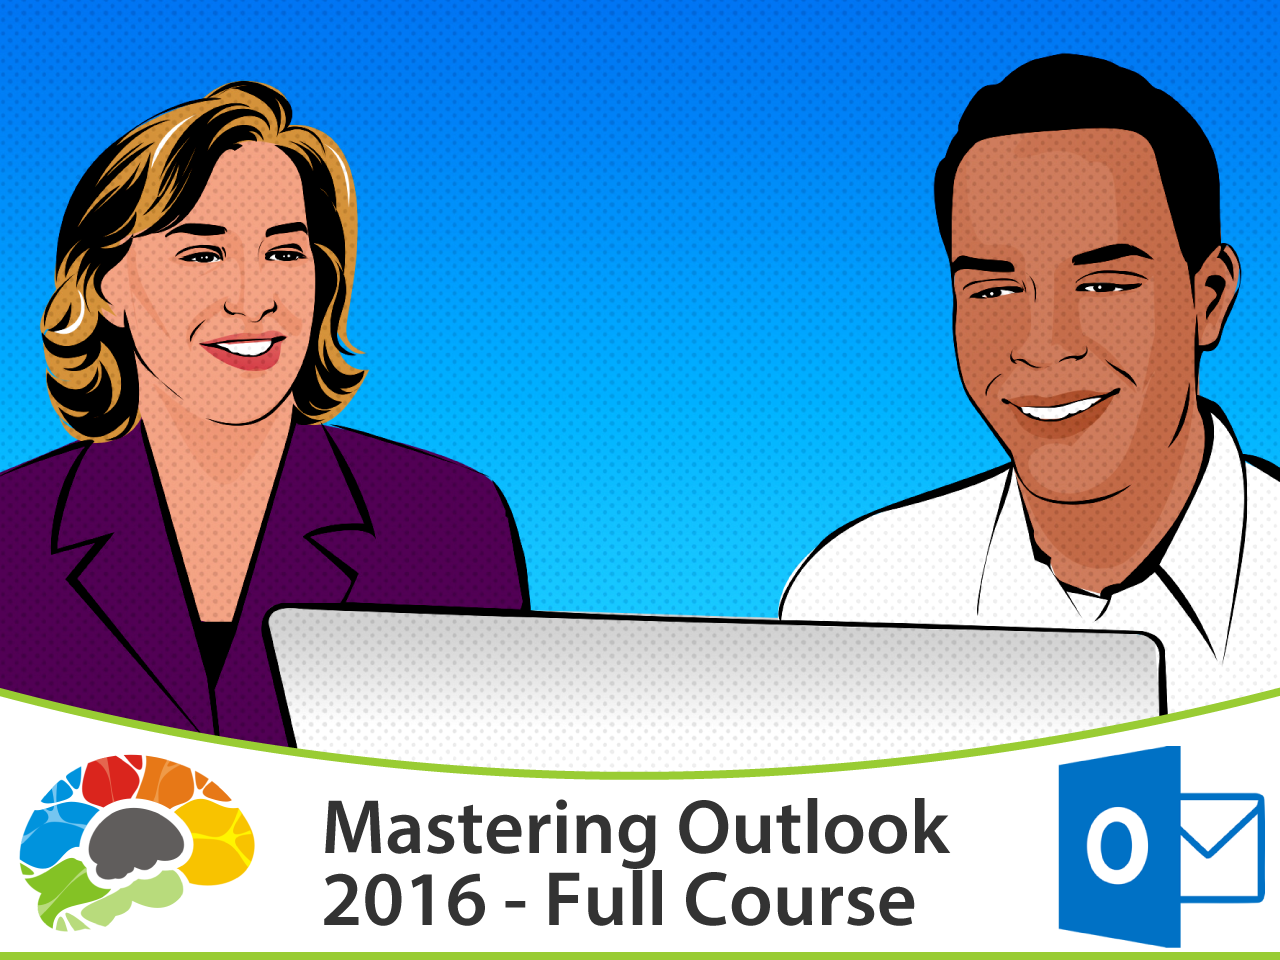 Mastering Outlook 2016 (full course)